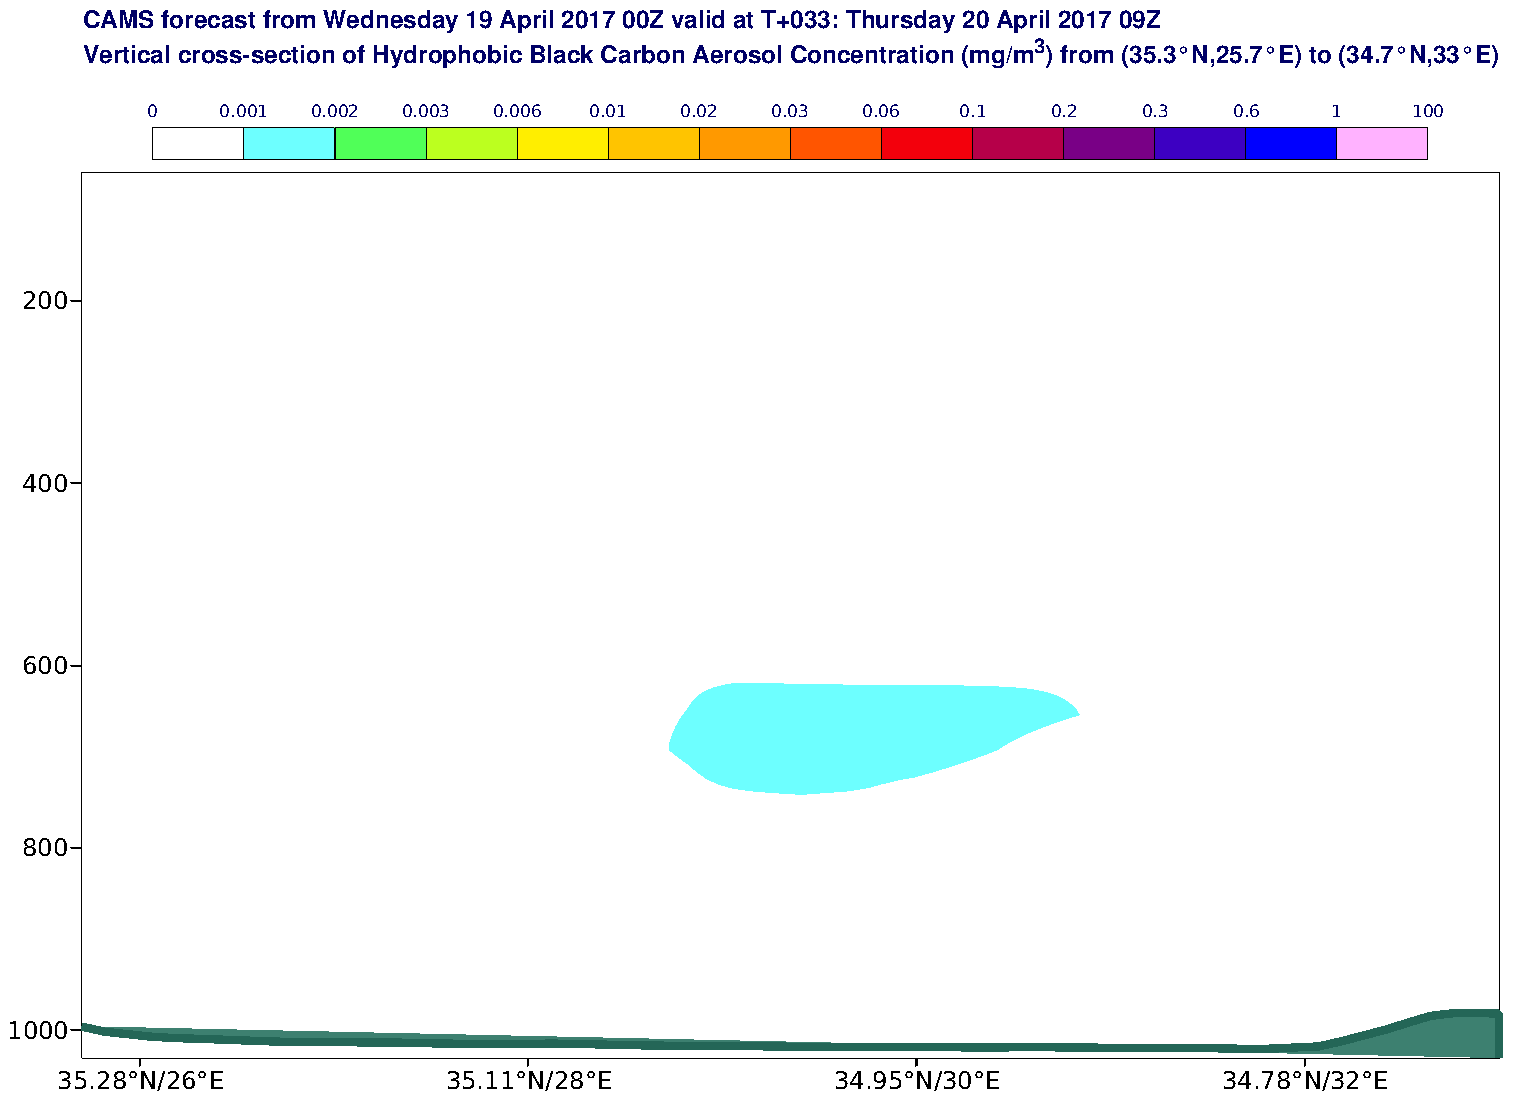 Vertical cross-section of Hydrophobic Black Carbon Aerosol Concentration (mg/m3) valid at T33 - 2017-04-20 09:00